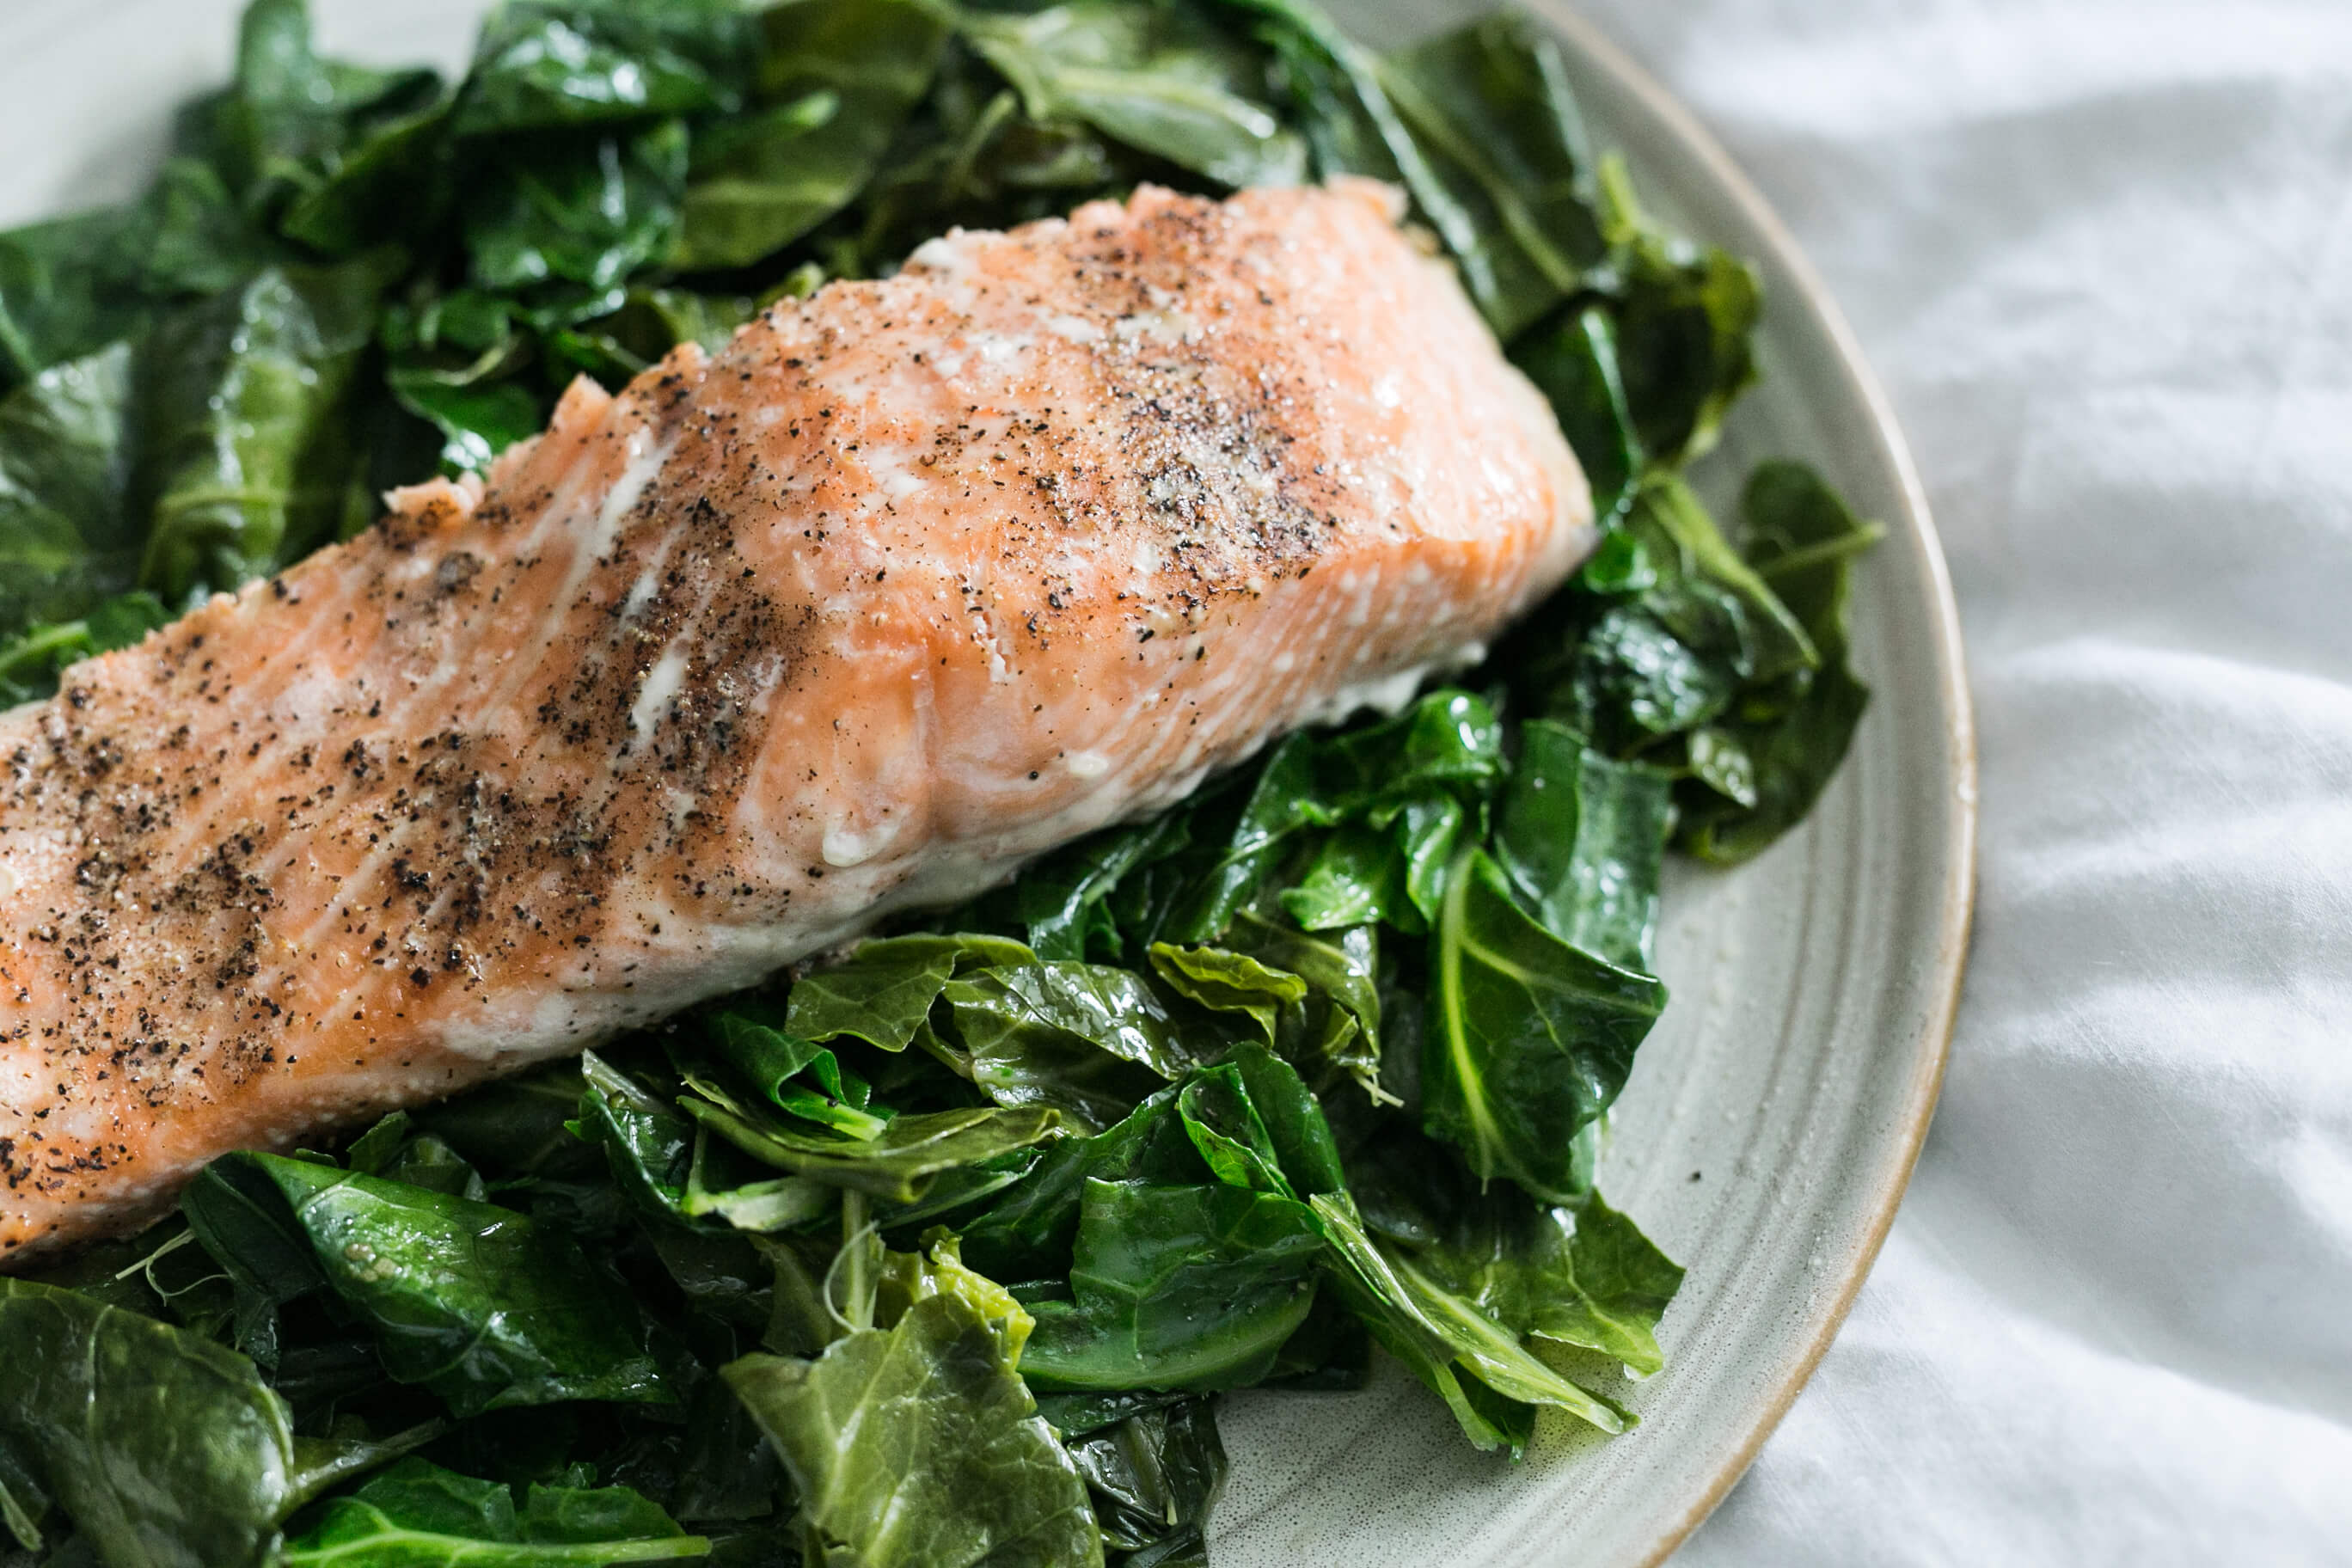 Nutrition Planning for Prenatal Women with Dr. Aviva Romm: Salmon with Coconut Kale